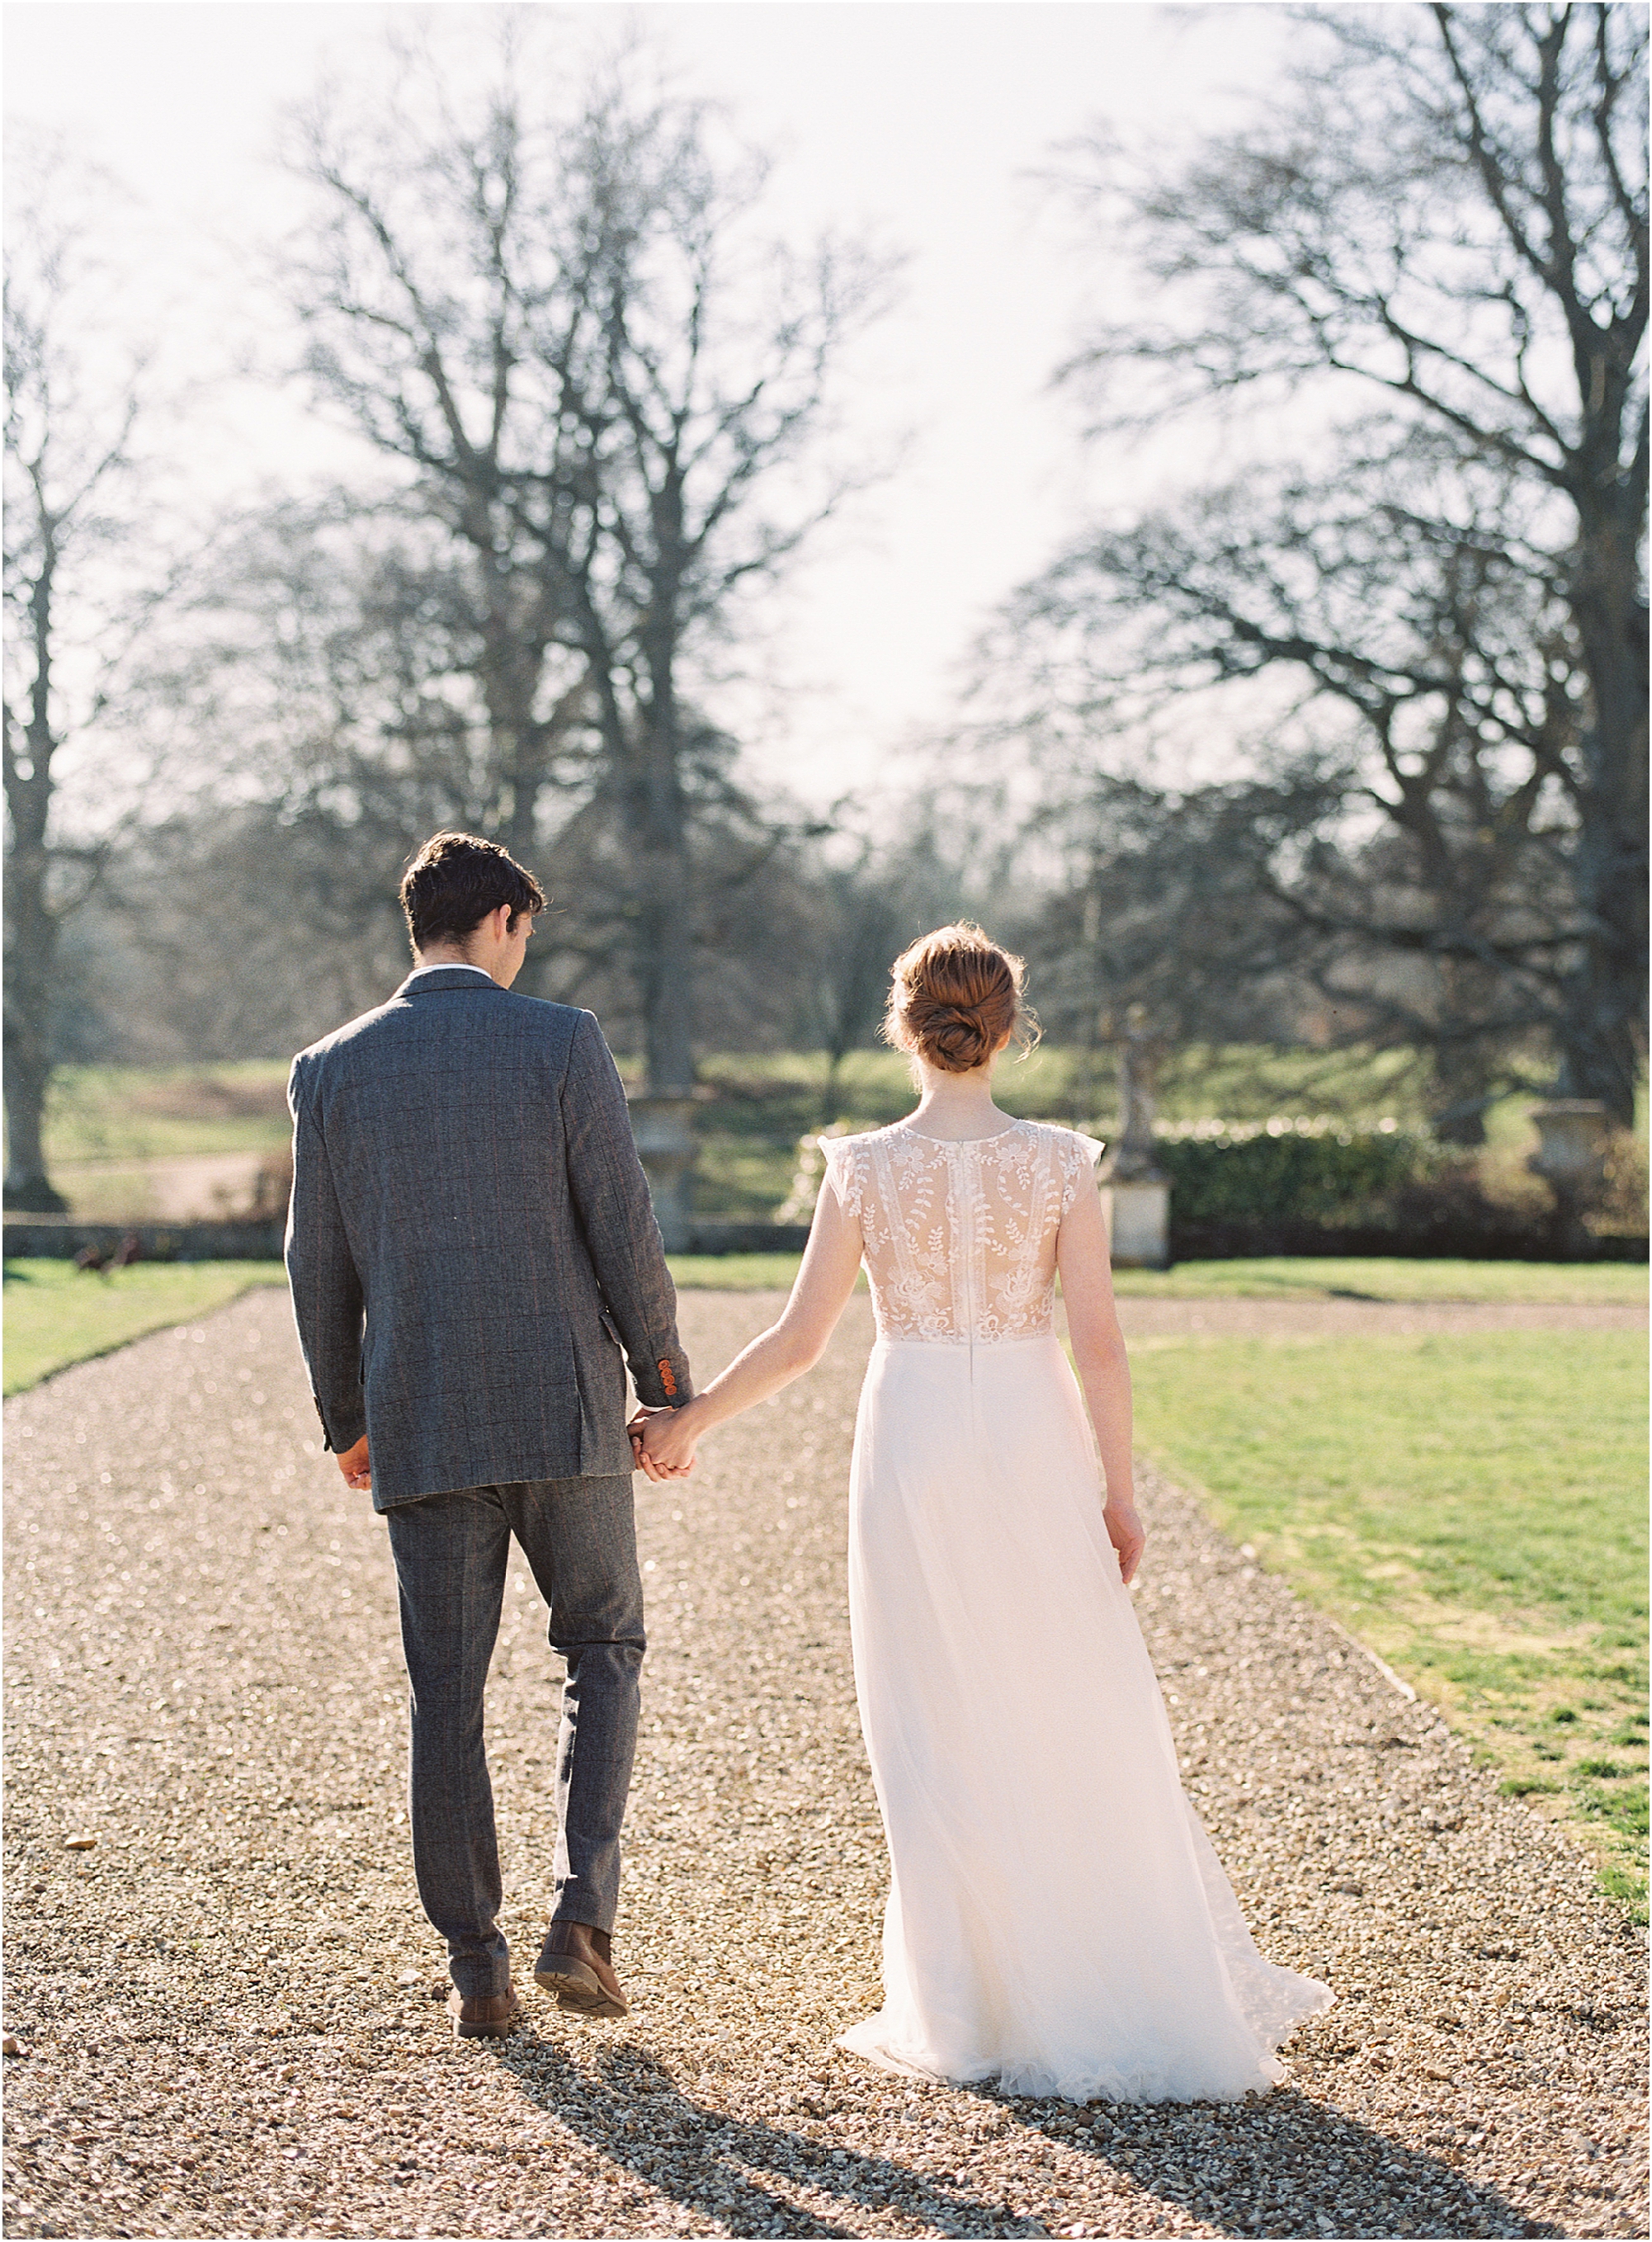 Wedding couple walking in the grounds of Somerley House